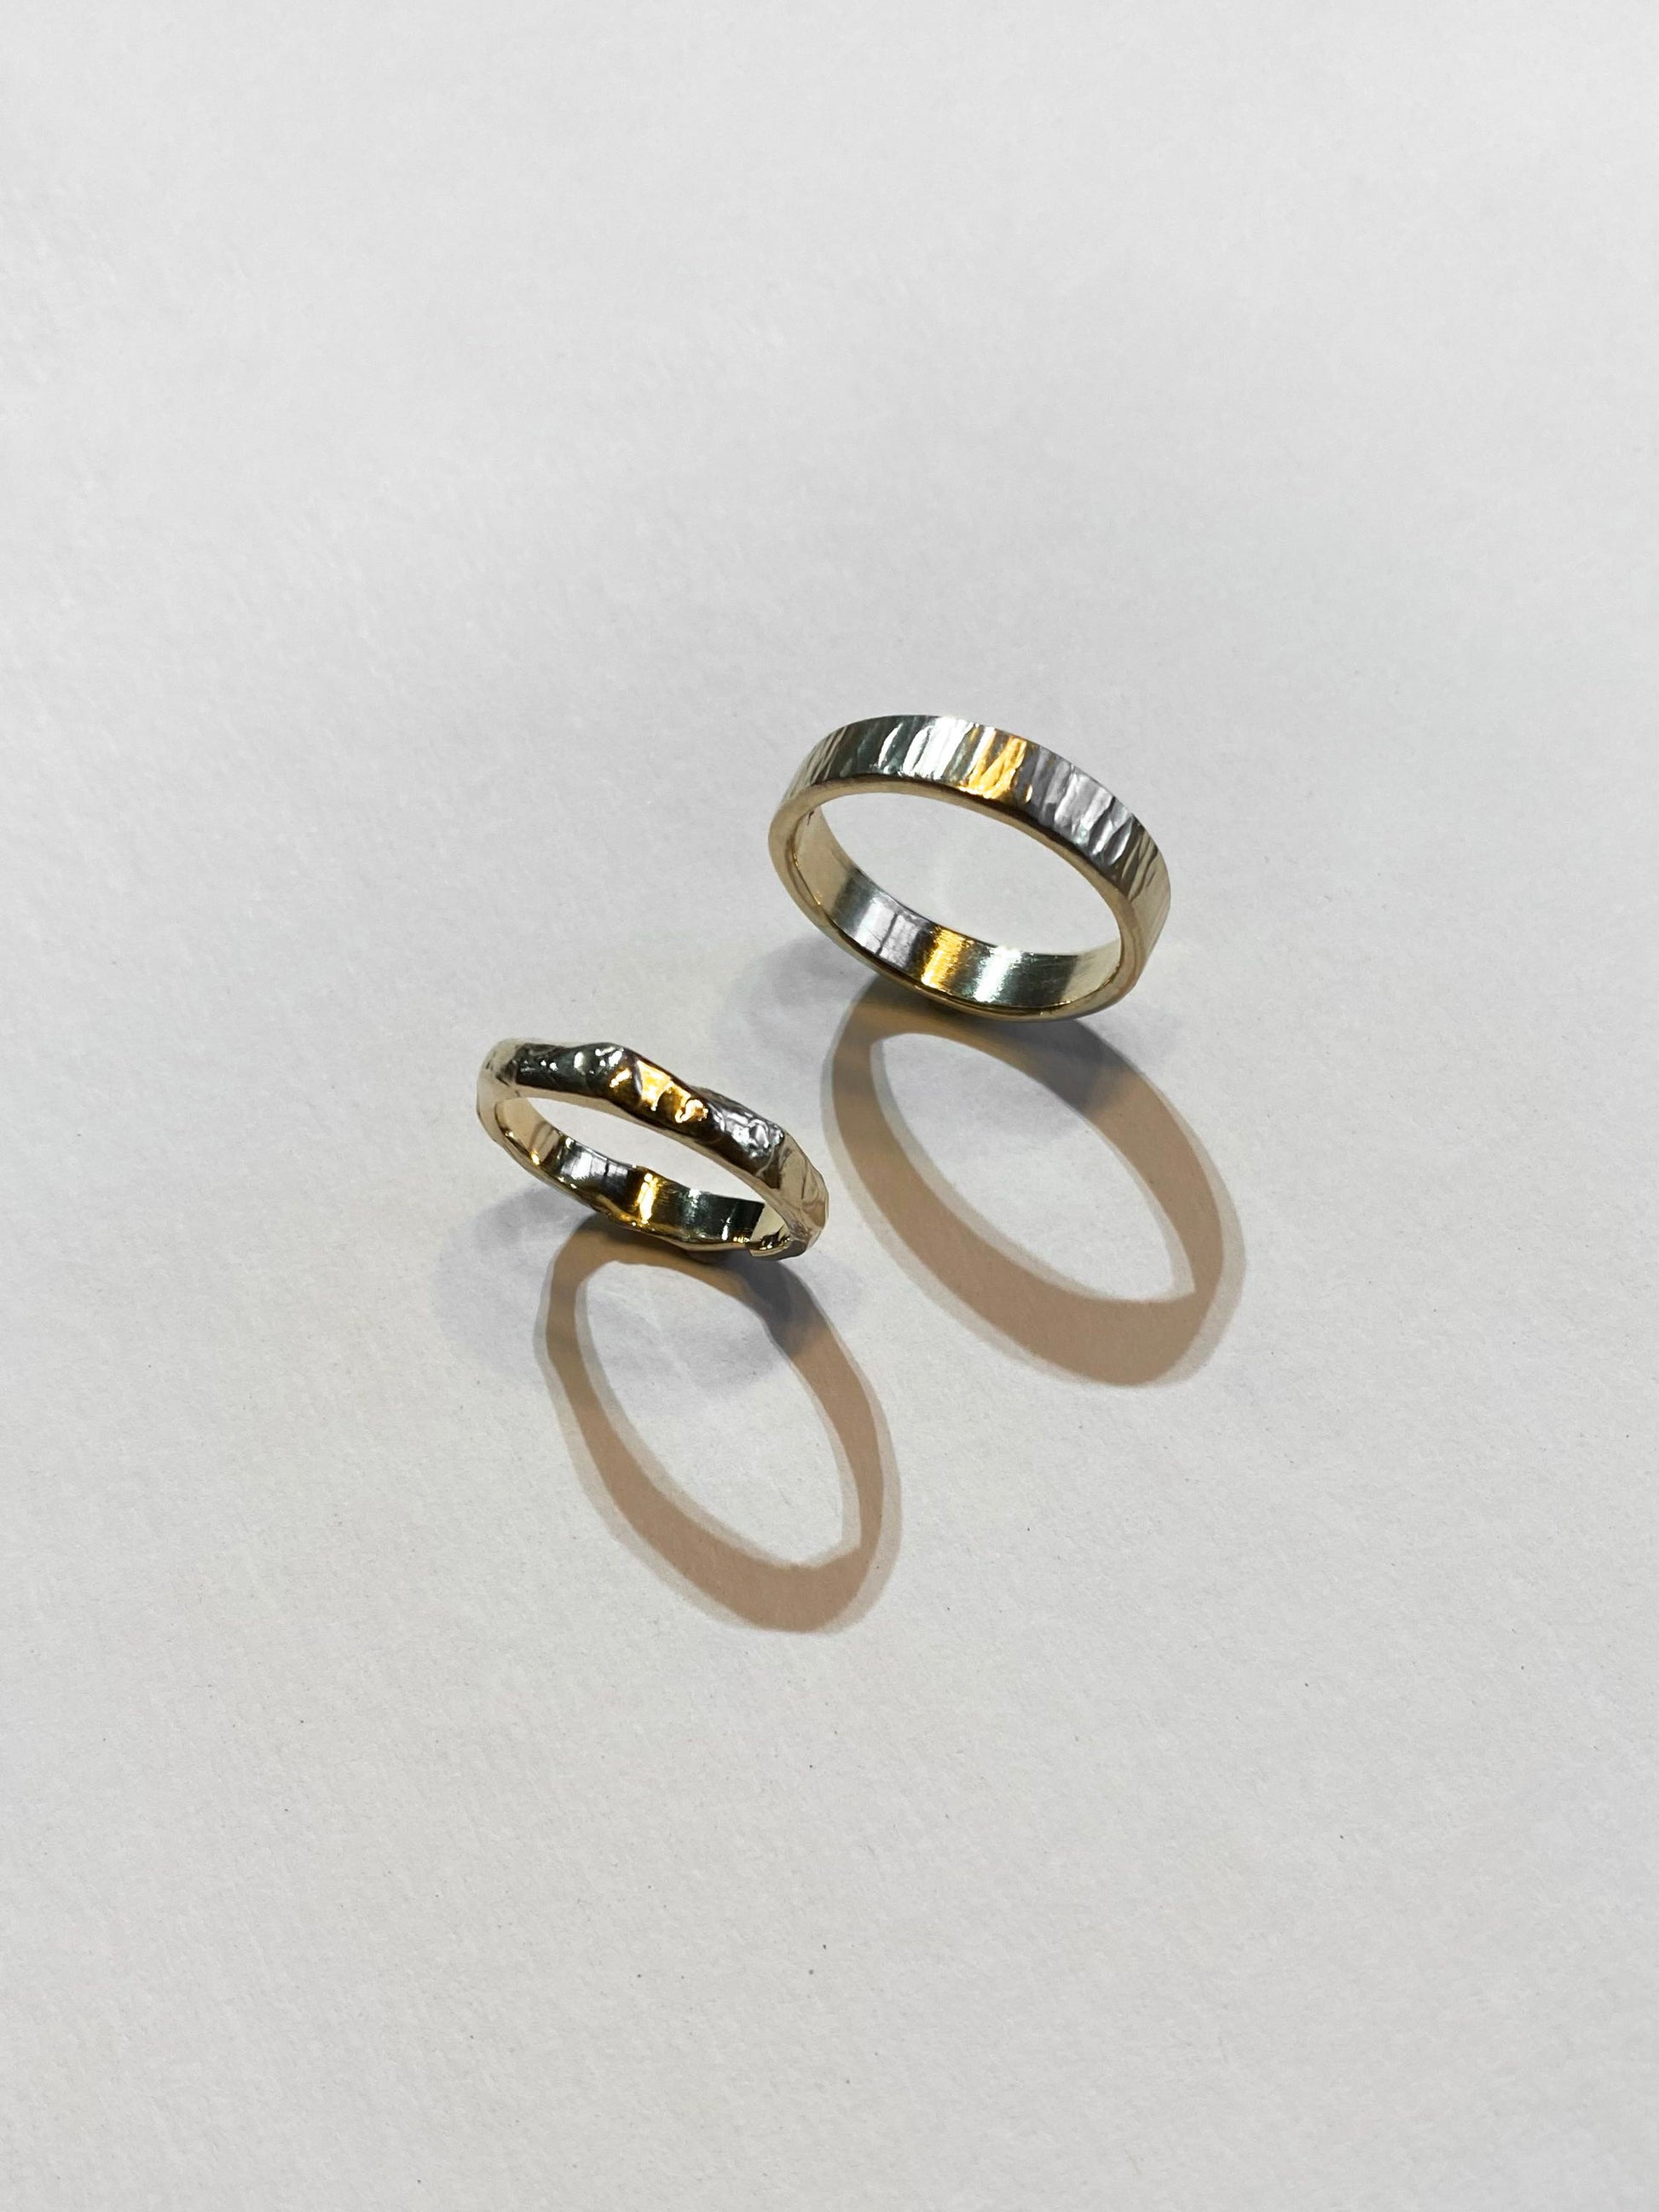 Two textured and molten wedding rings on white background